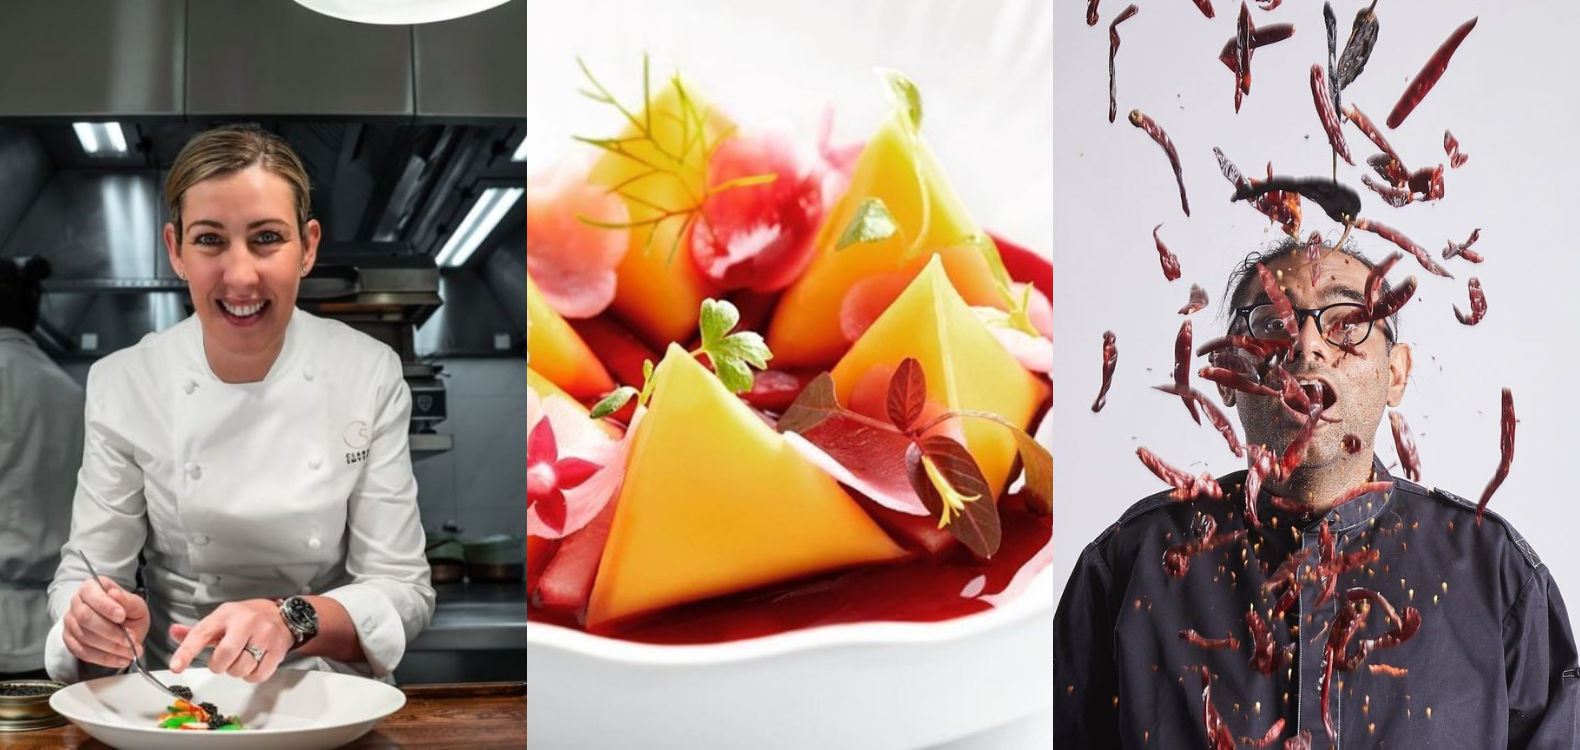 10 of the world’s most famous chefs and their signature dishes you should try